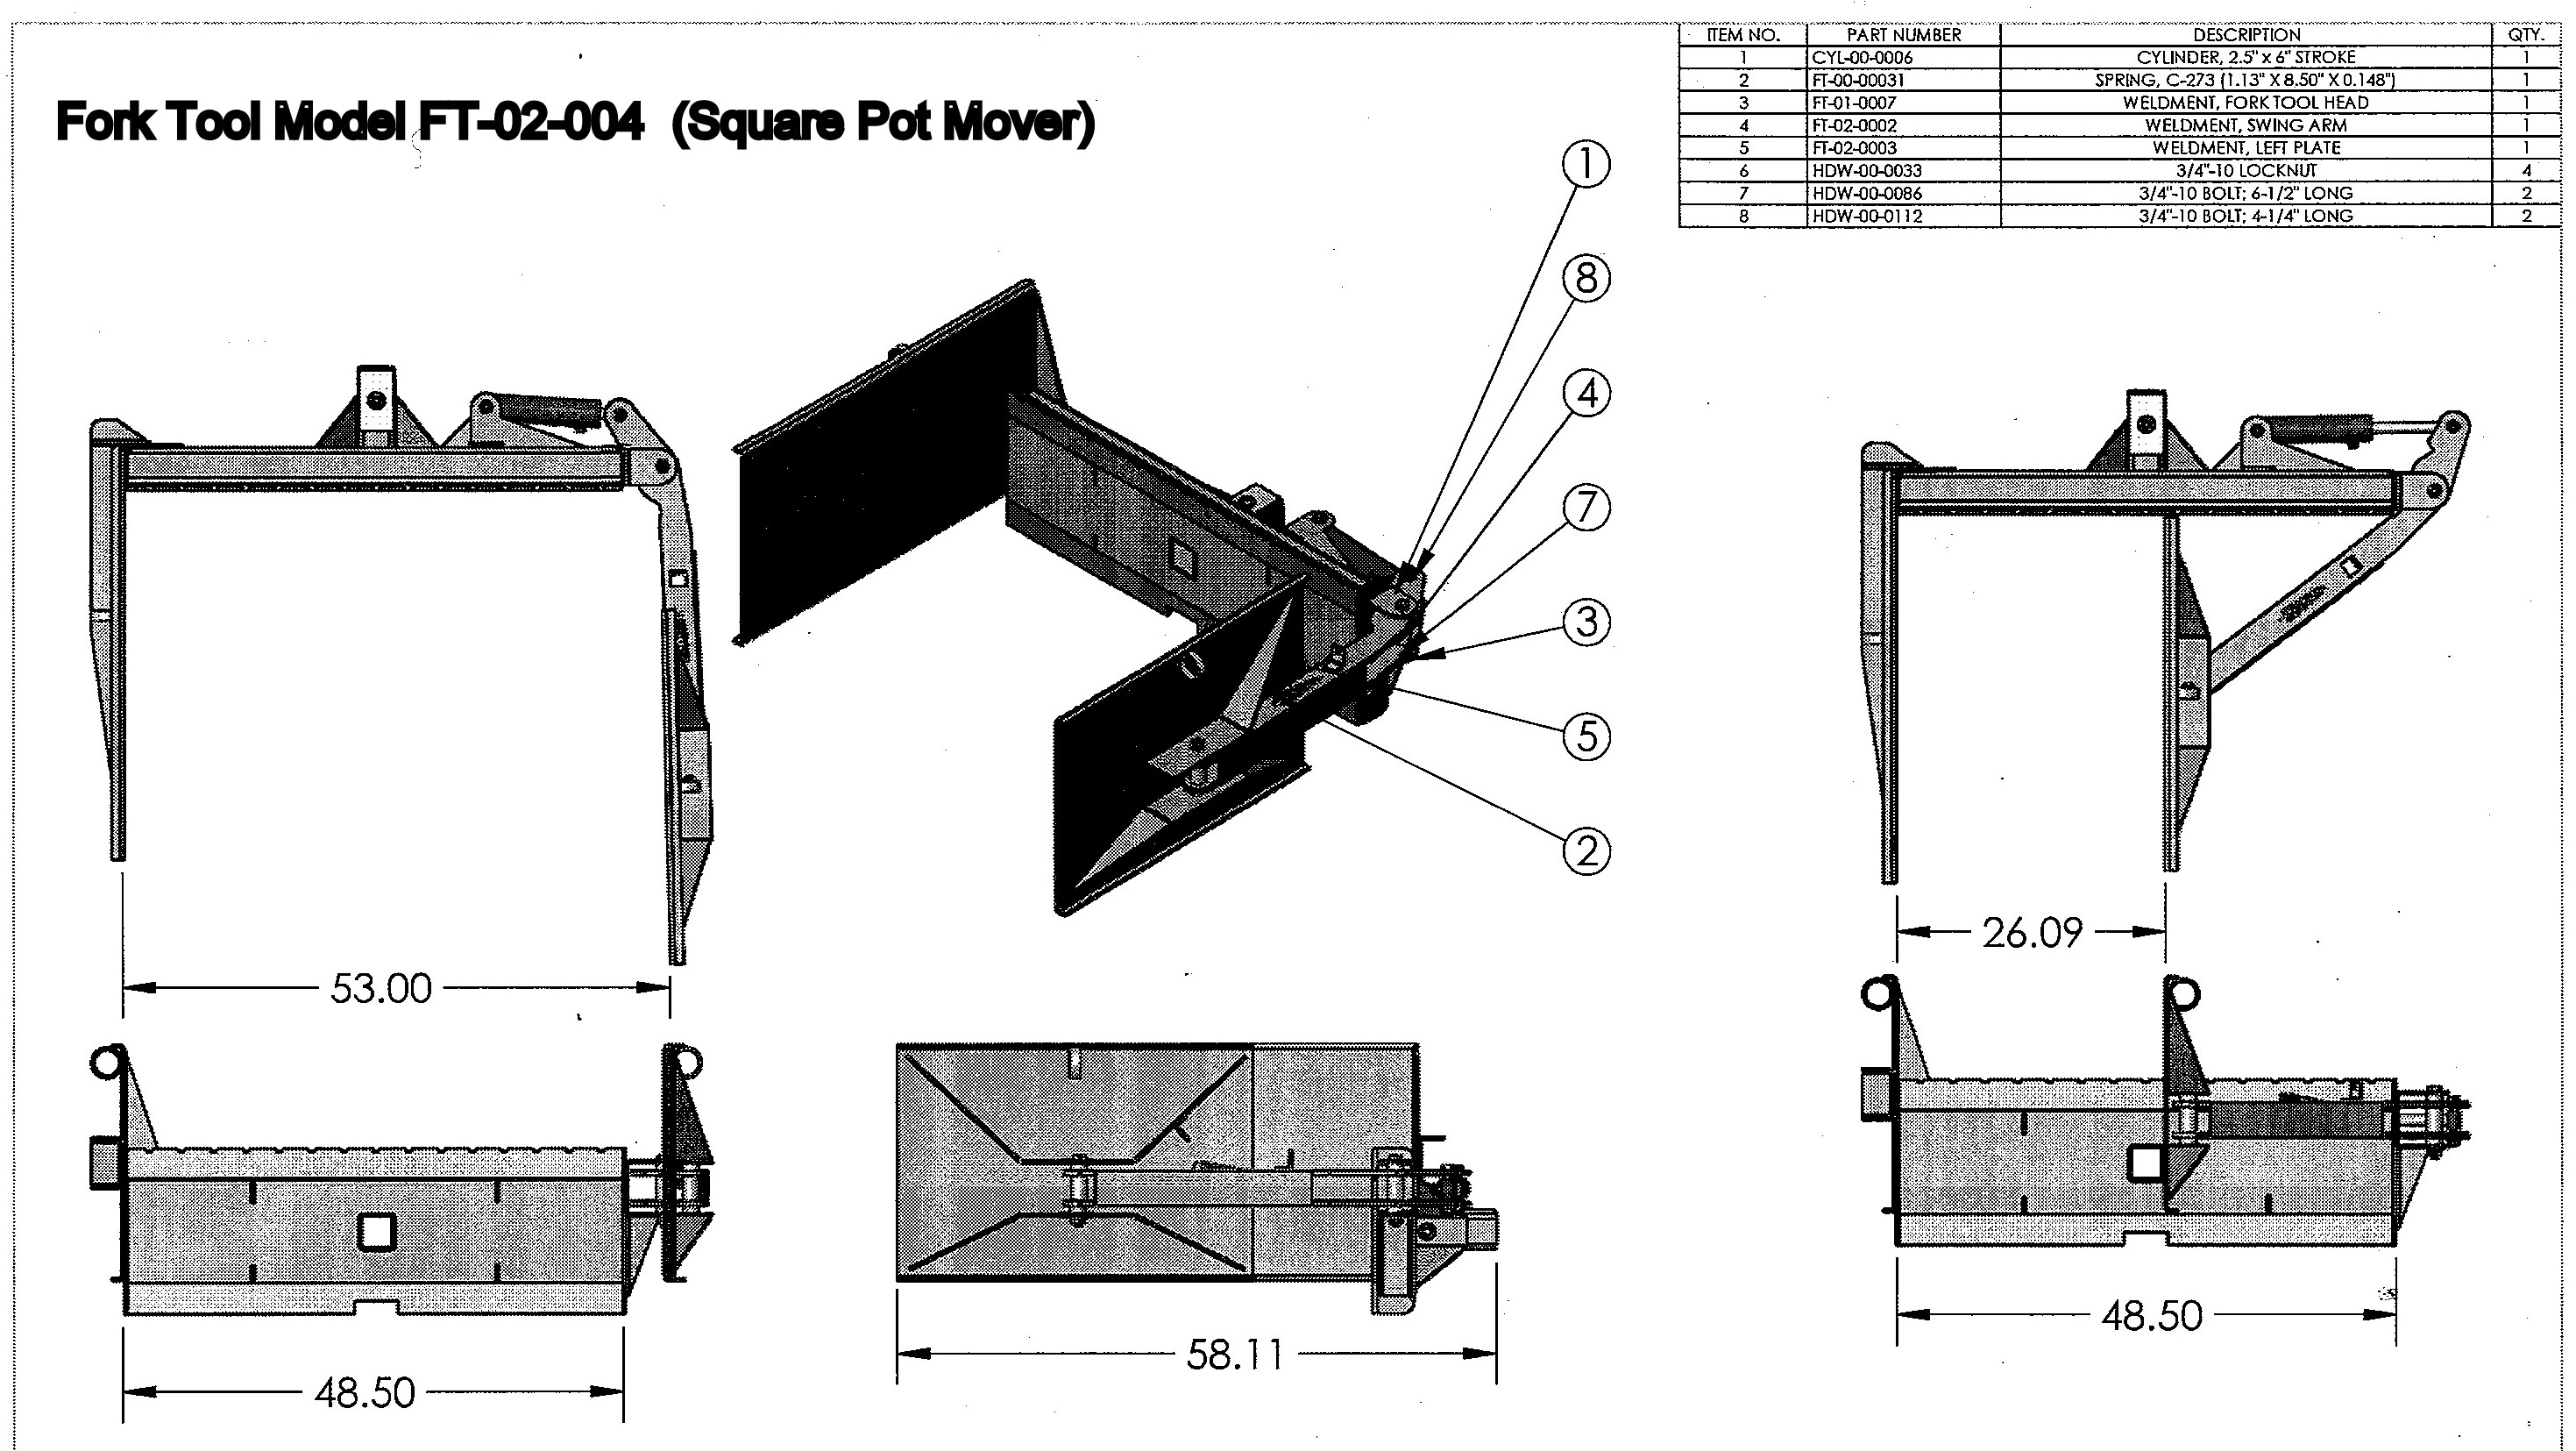 Square Pot Mover / Fork Tool